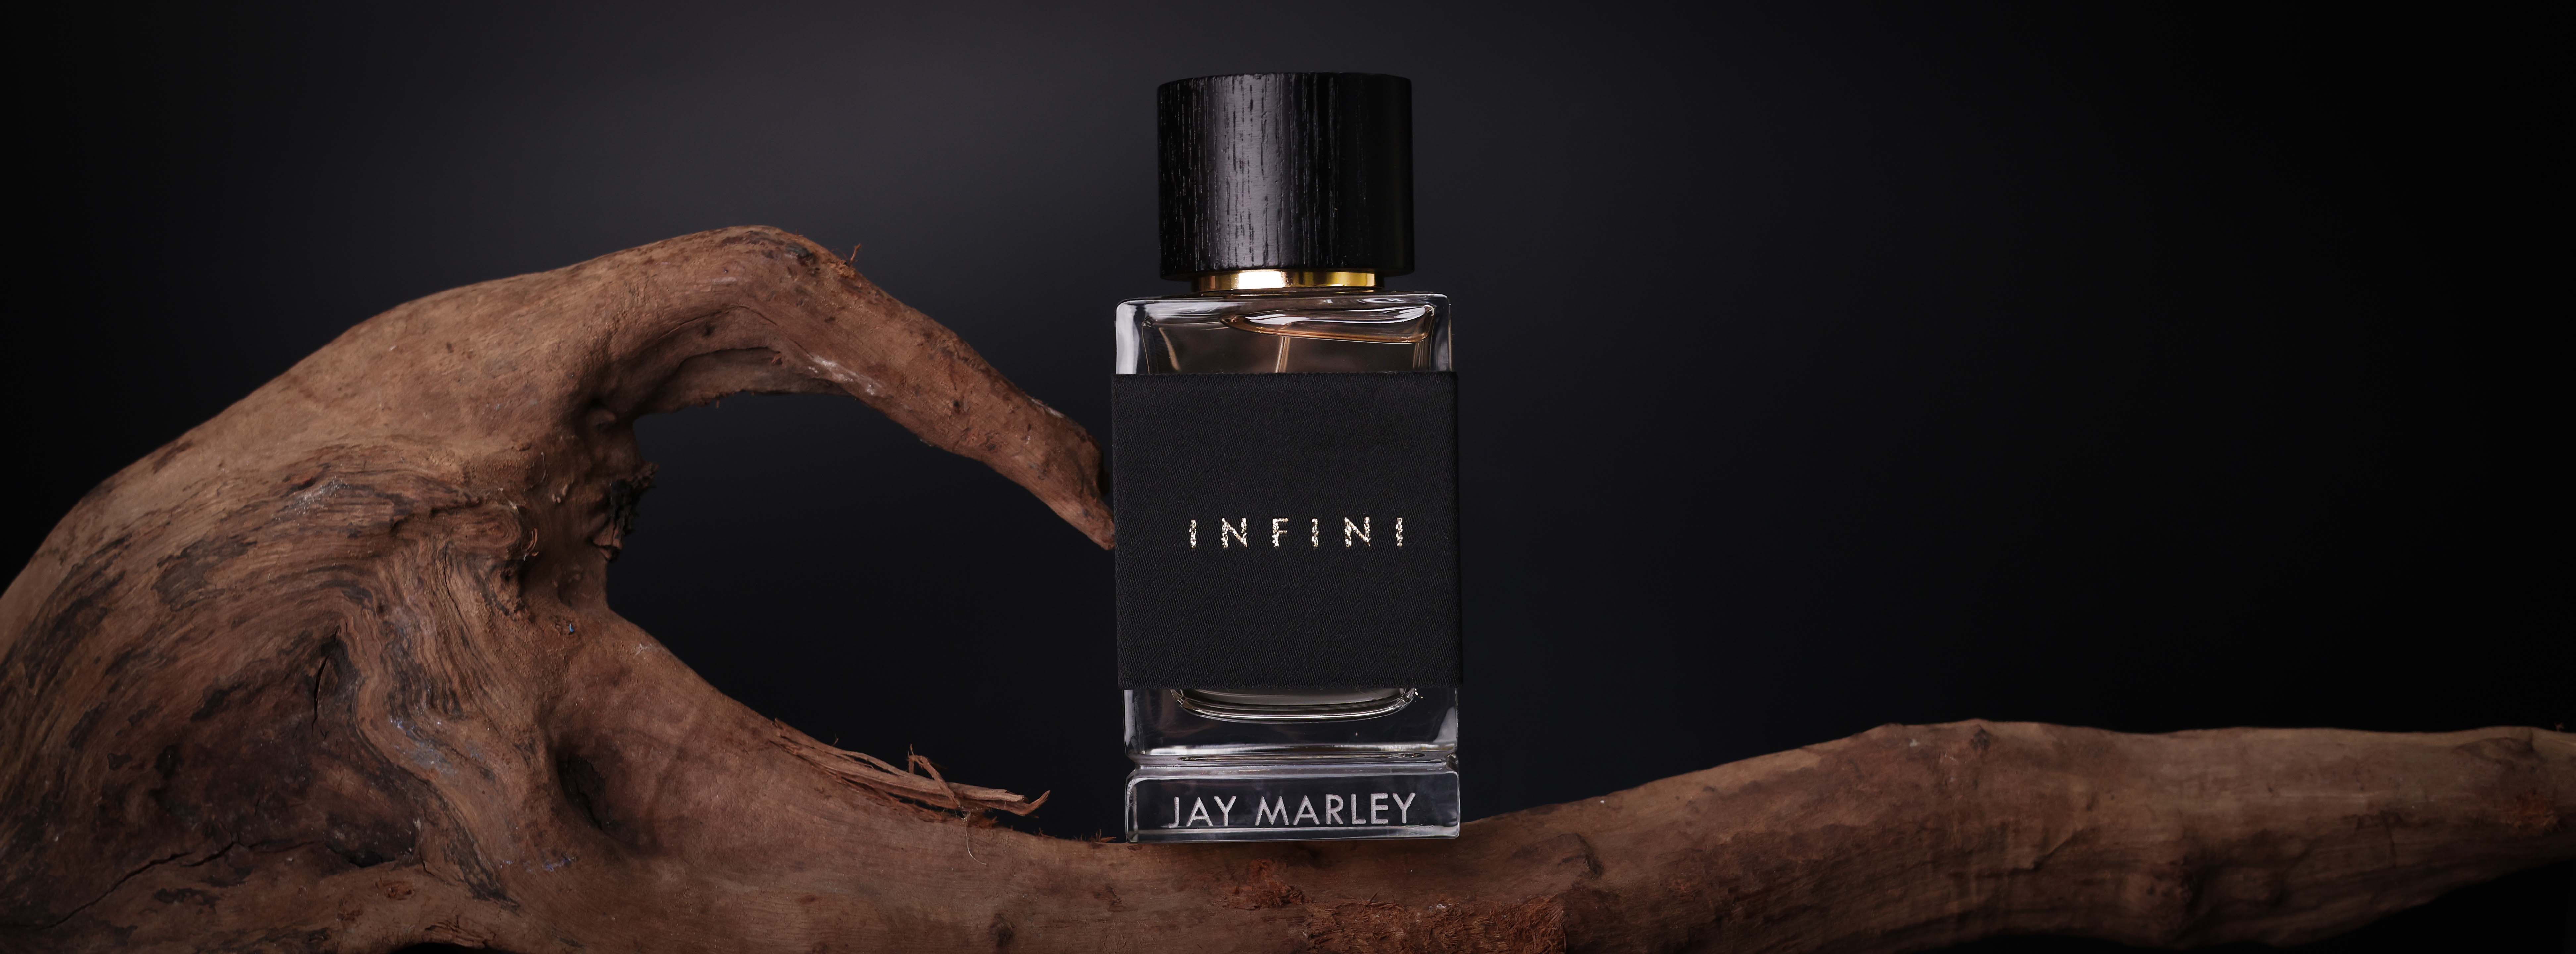 Perfume Collection - Infini From Jay Marley